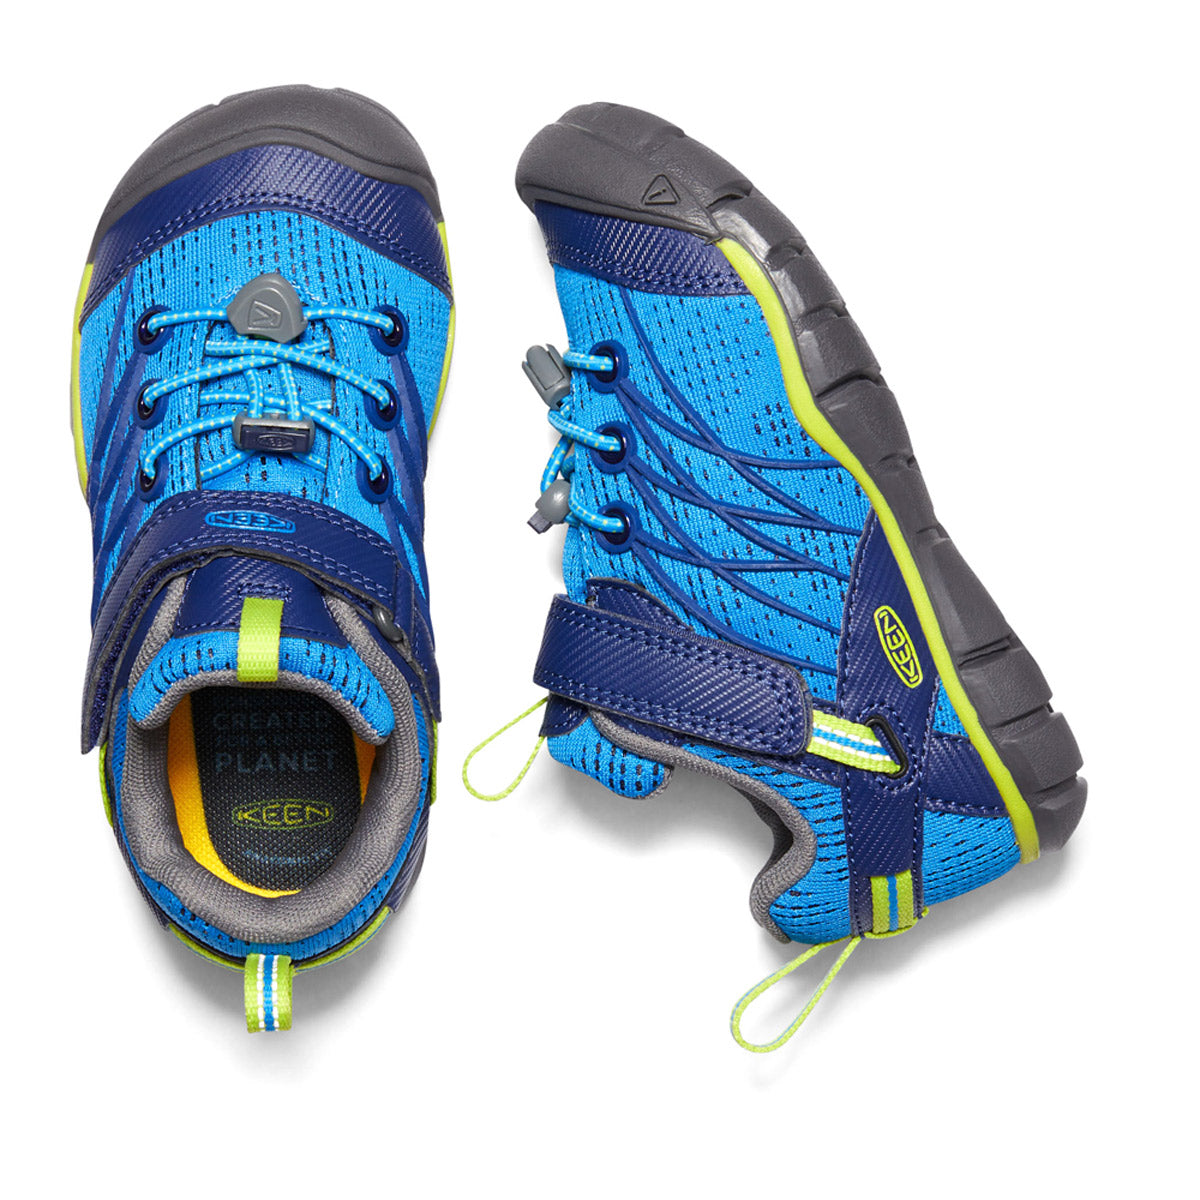 A pair of blue and yellow children&#39;s hiking shoes, the KEEN CHANDLER CNX BRILLIANT BLUE/BLUE DEPTHS with laces on a white background.